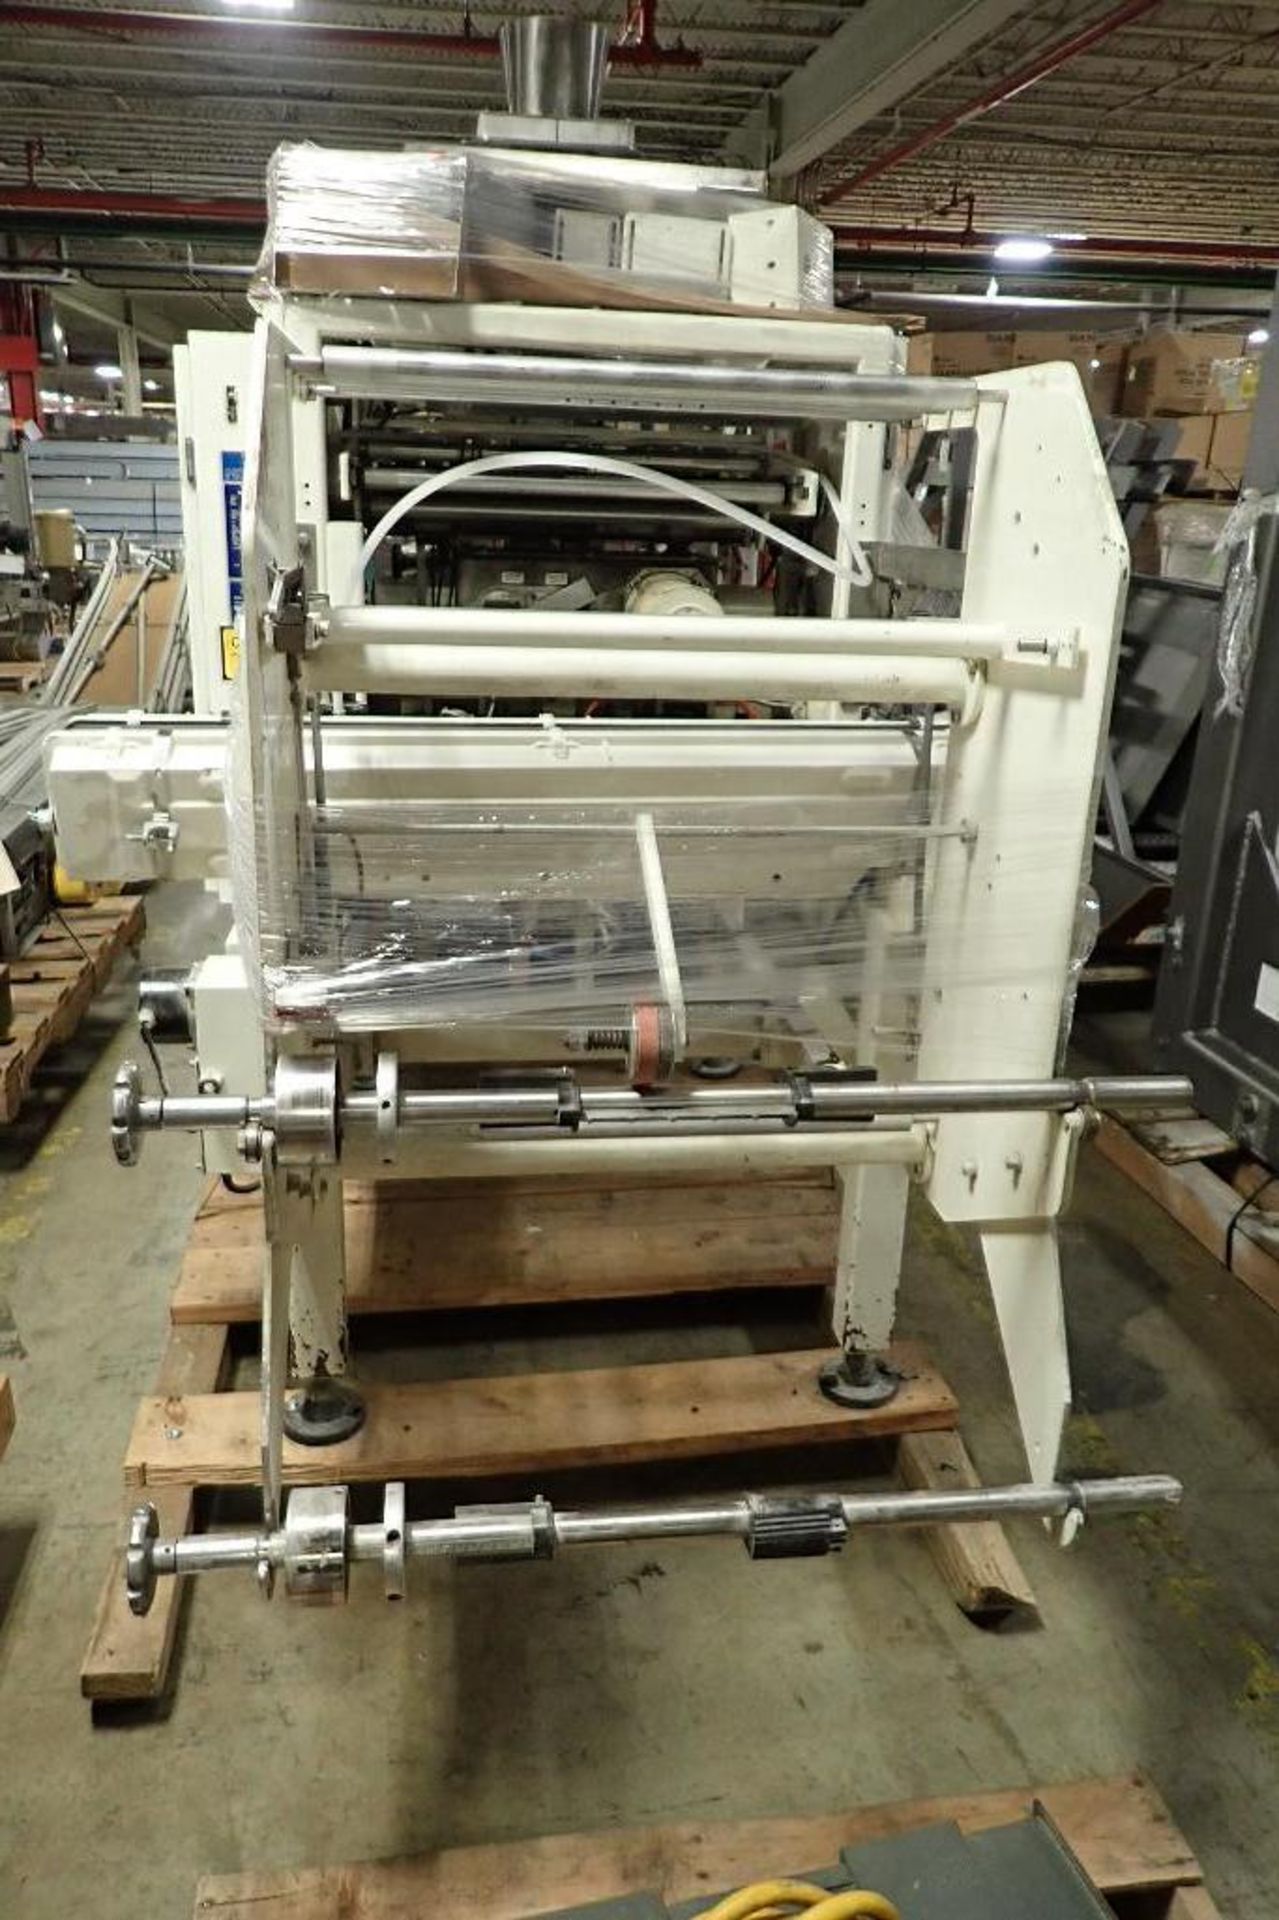 1994 Hayssen Yamato data weigh 8 head scale, Model ADW-508MD, SN 084026/930442, 8 g to 1000 g capaci - Image 31 of 34